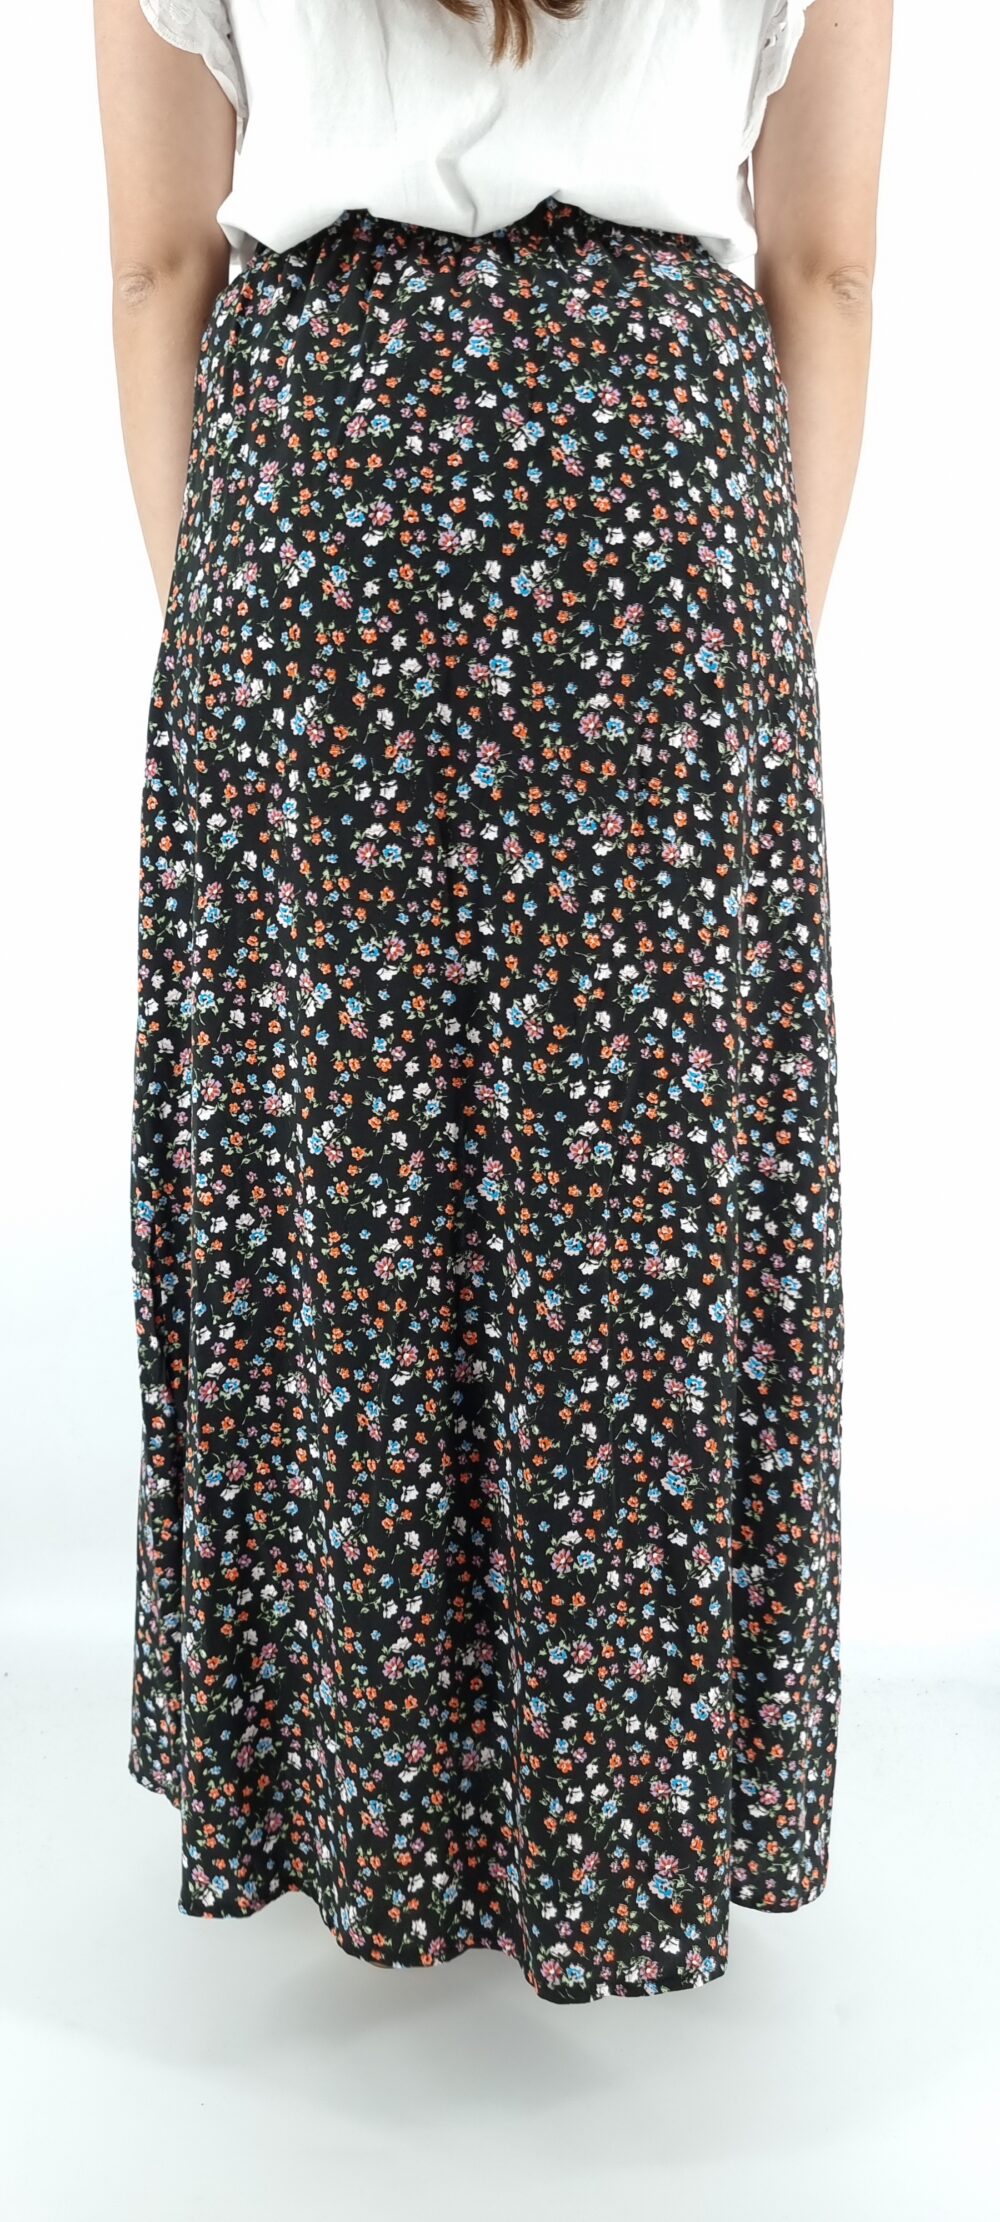 Long floral skirt with elastic in the middle and decorative buttons black